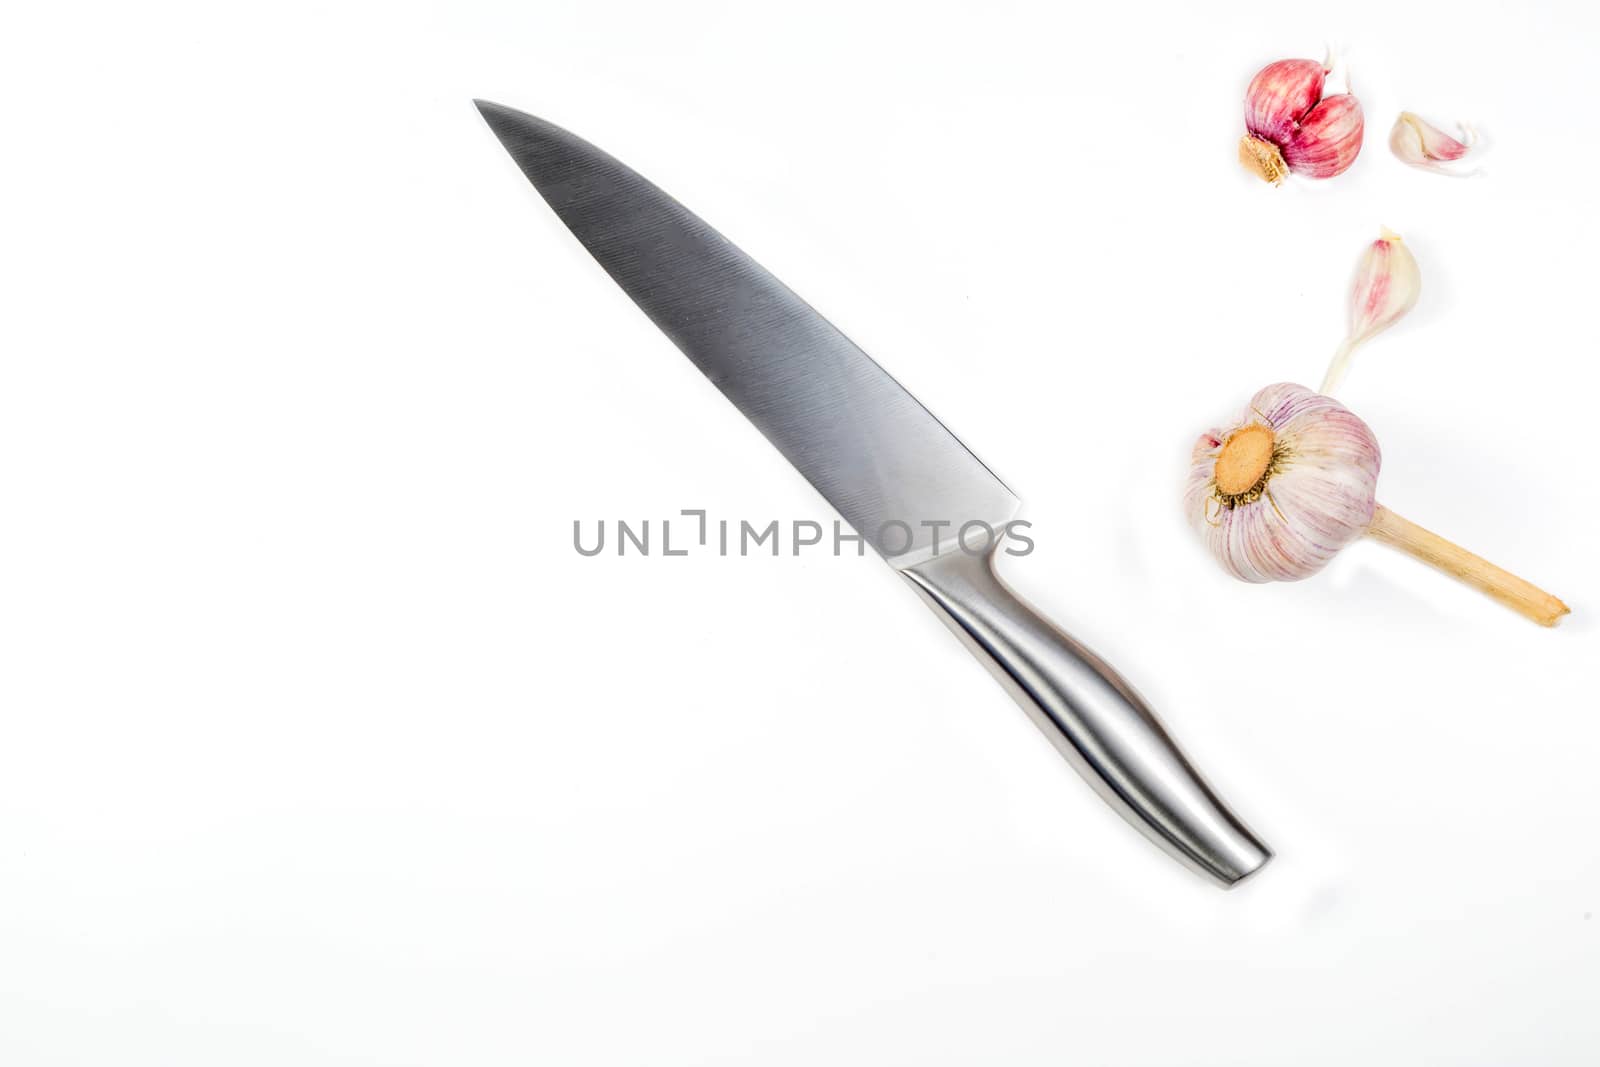 Closeup image of chief knife and garlic on white table